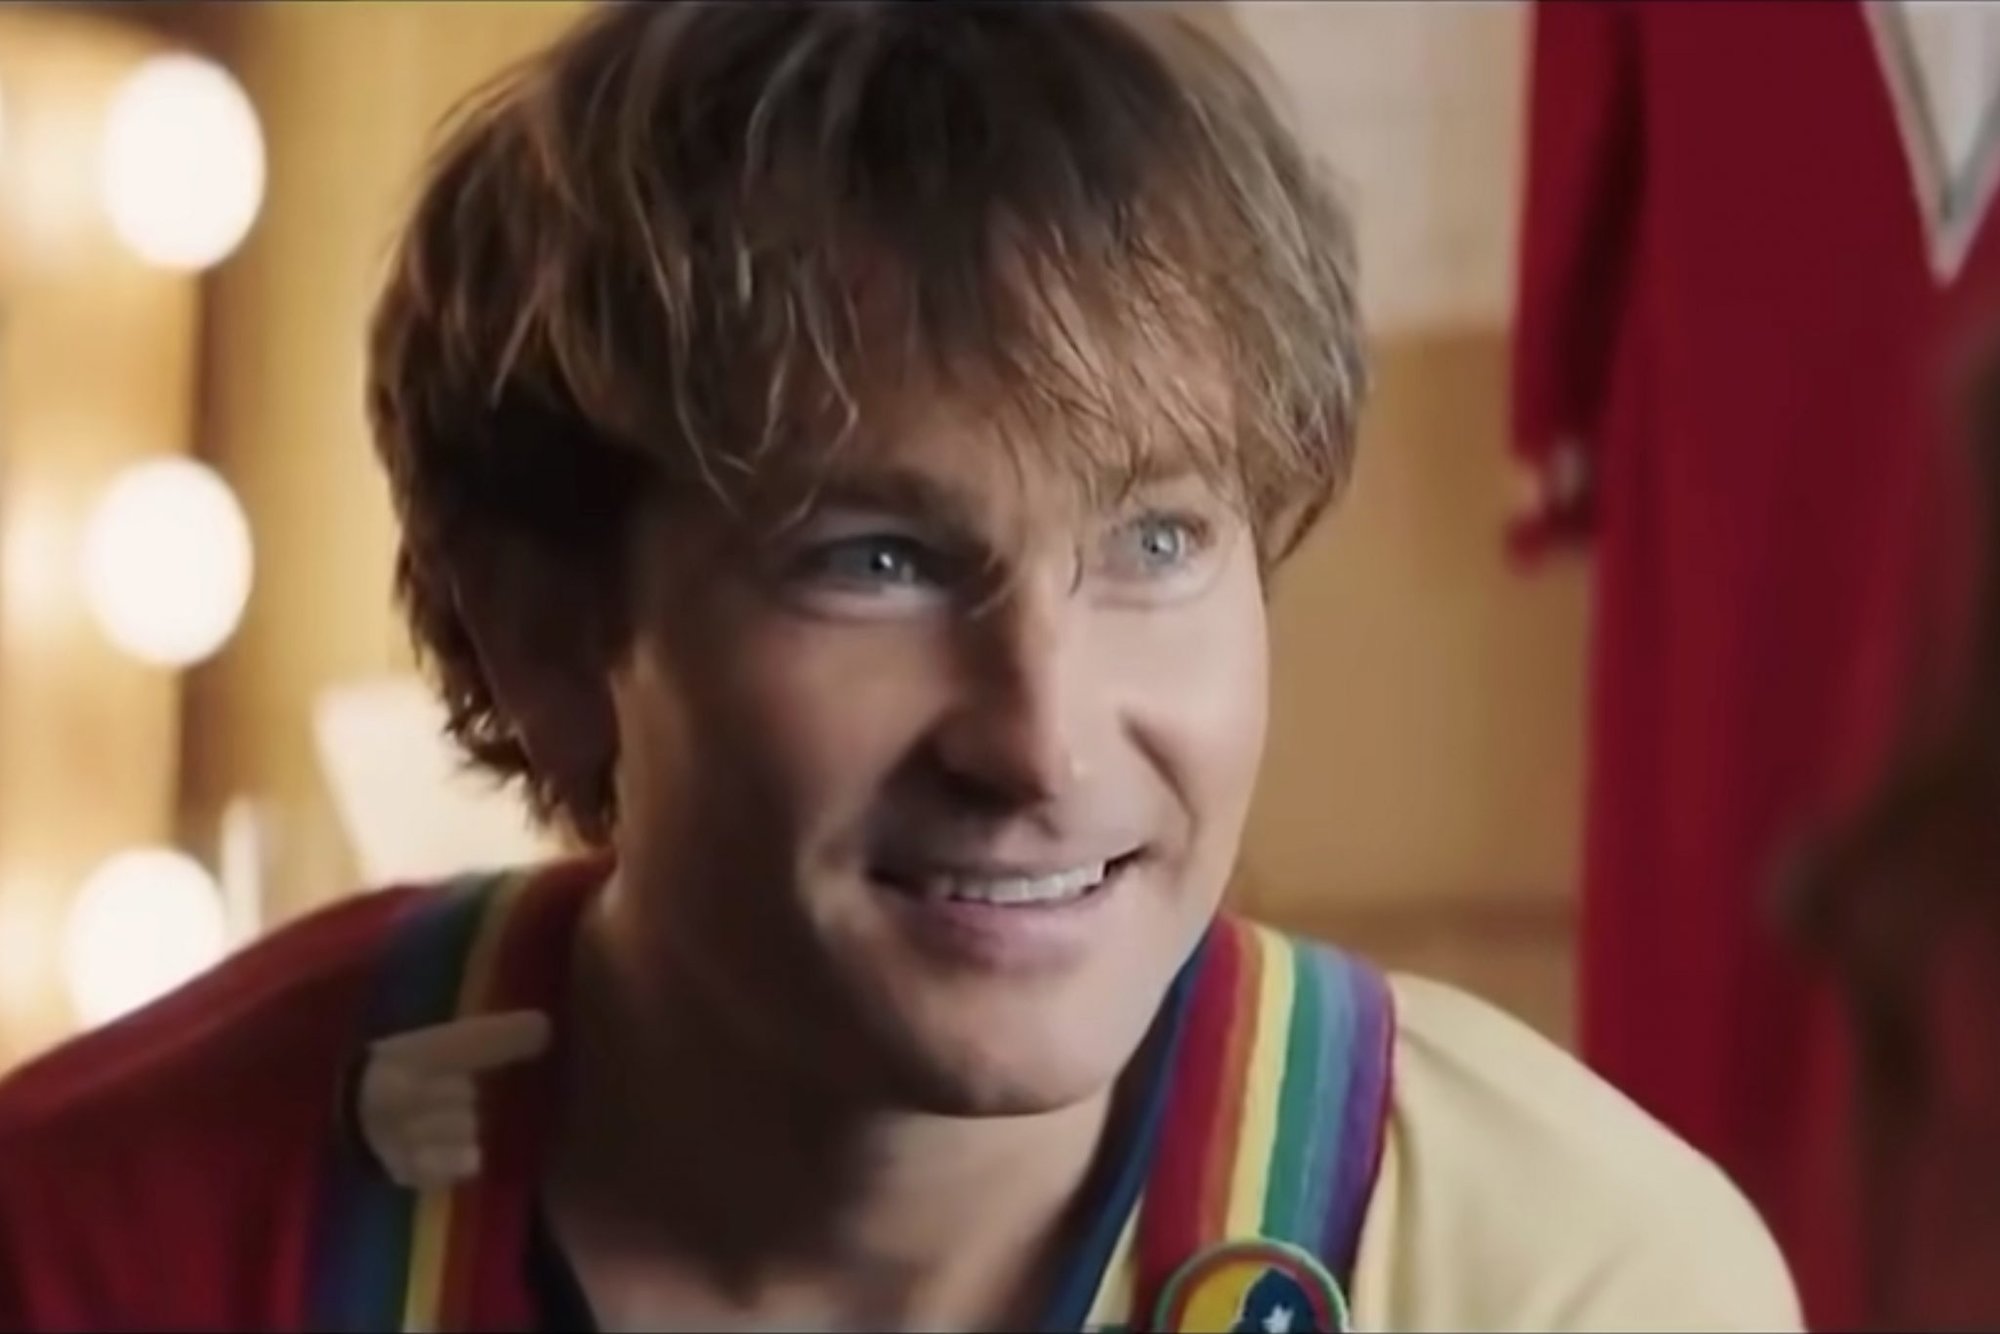 Actor Jamie Costa portrays Robin Williams in a short film. Screenshot from YouTube.